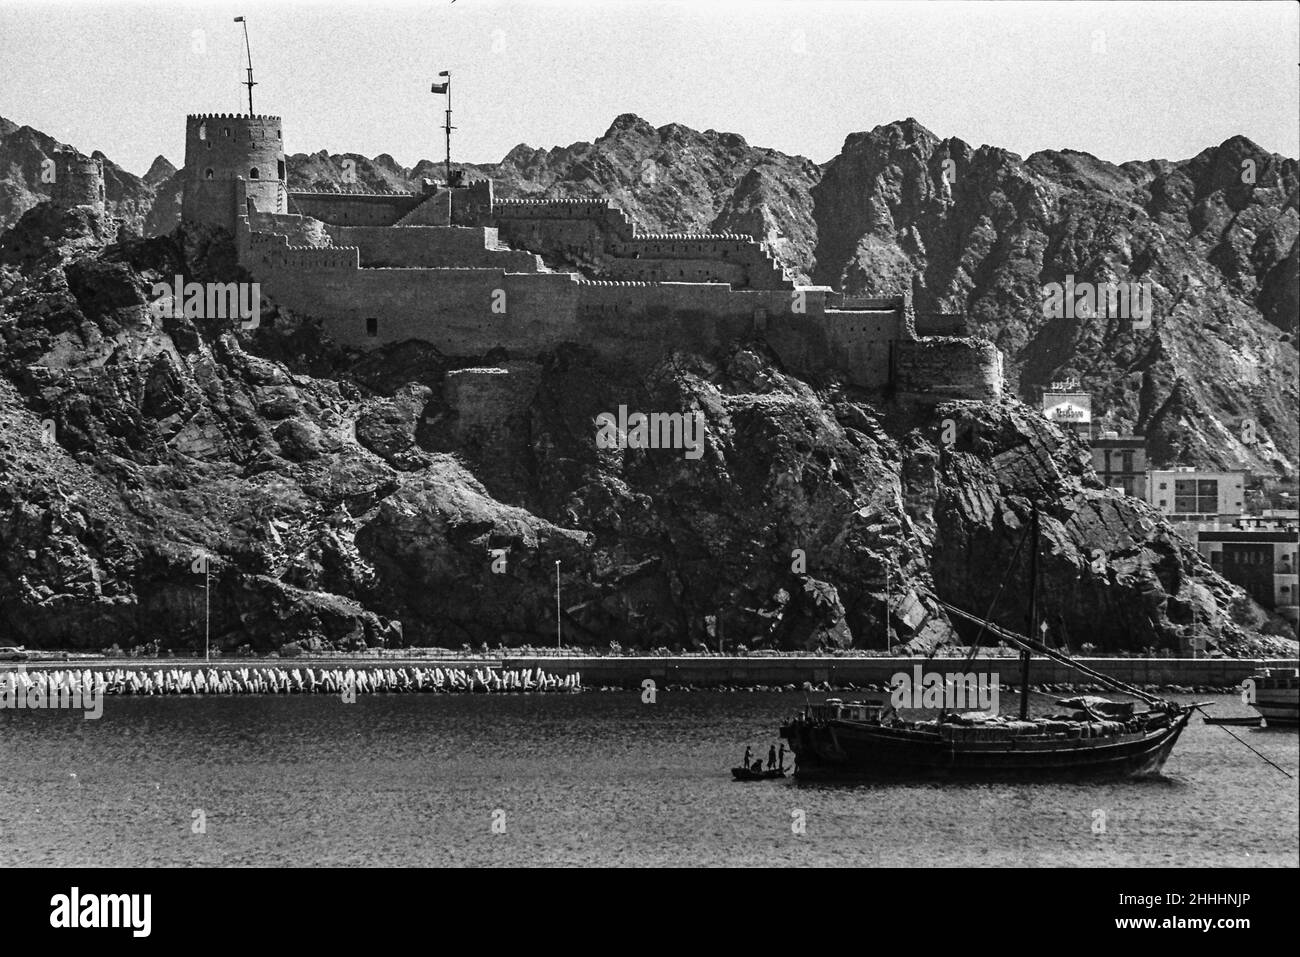 Mutrah Fort, built by the Portuguese in 16th Century, Muscat, Oman, May 1978 Stock Photo